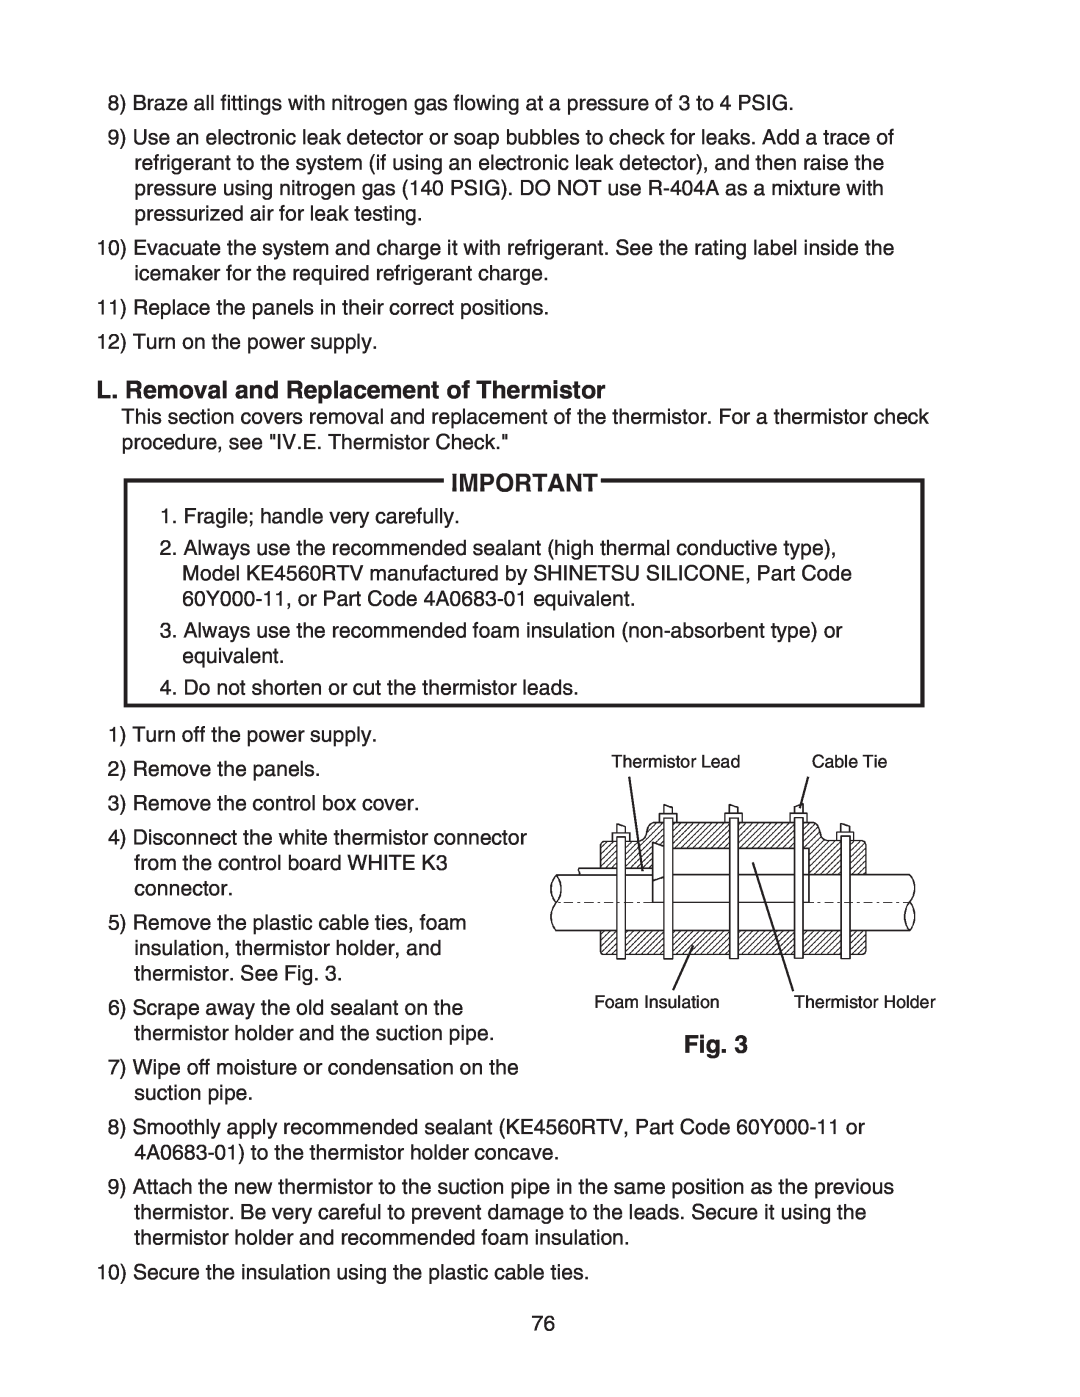 Hoshizaki KM-1301SRH/3, KM-1301SAH/3, KM-1301SWH/3 service manual L.Removal and Replacement of Thermistor, Fig 